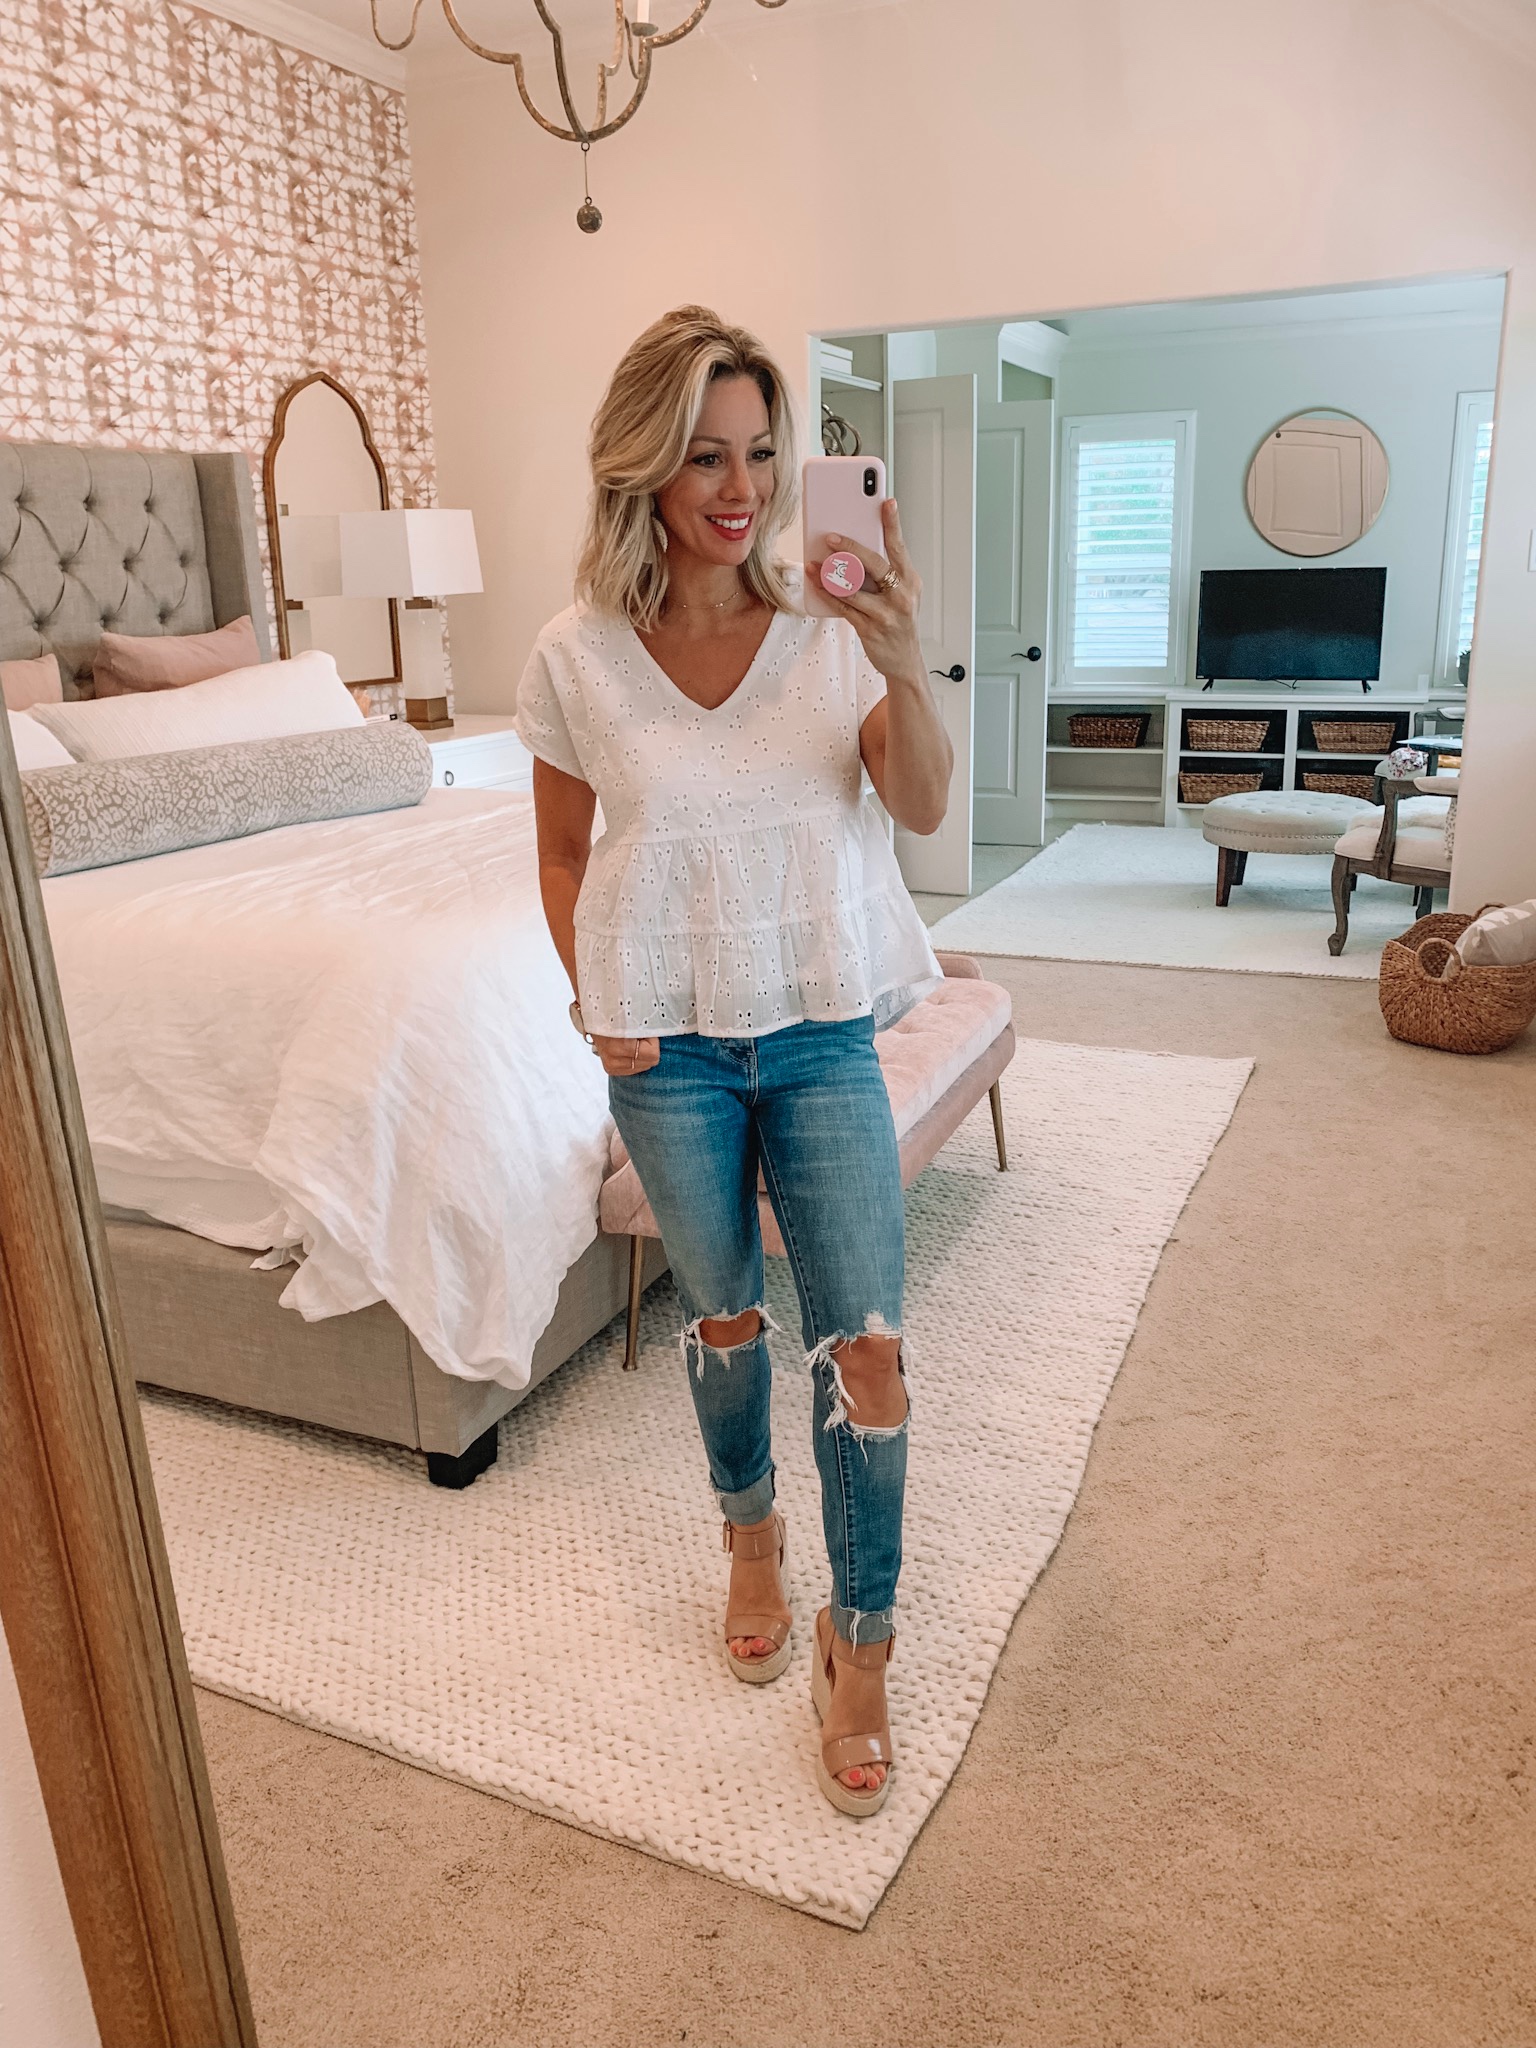 White eyelet top and ripped jeans with wedges